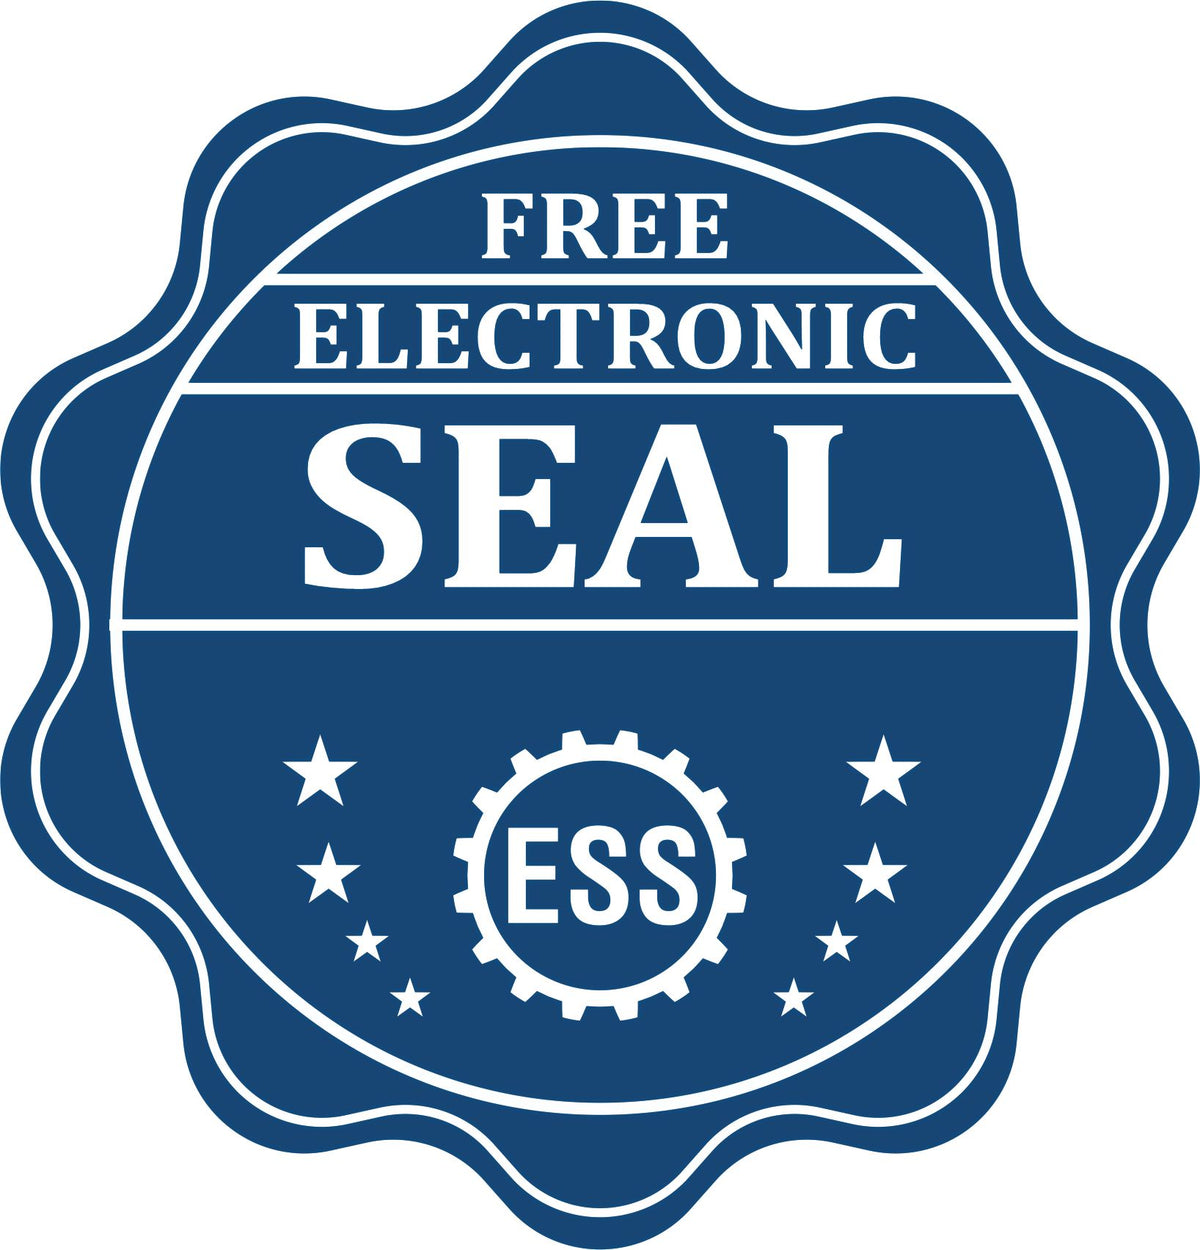 A badge showing a free electronic seal for the South Dakota Engineer Desk Seal with stars and the ESS gear on the emblem.